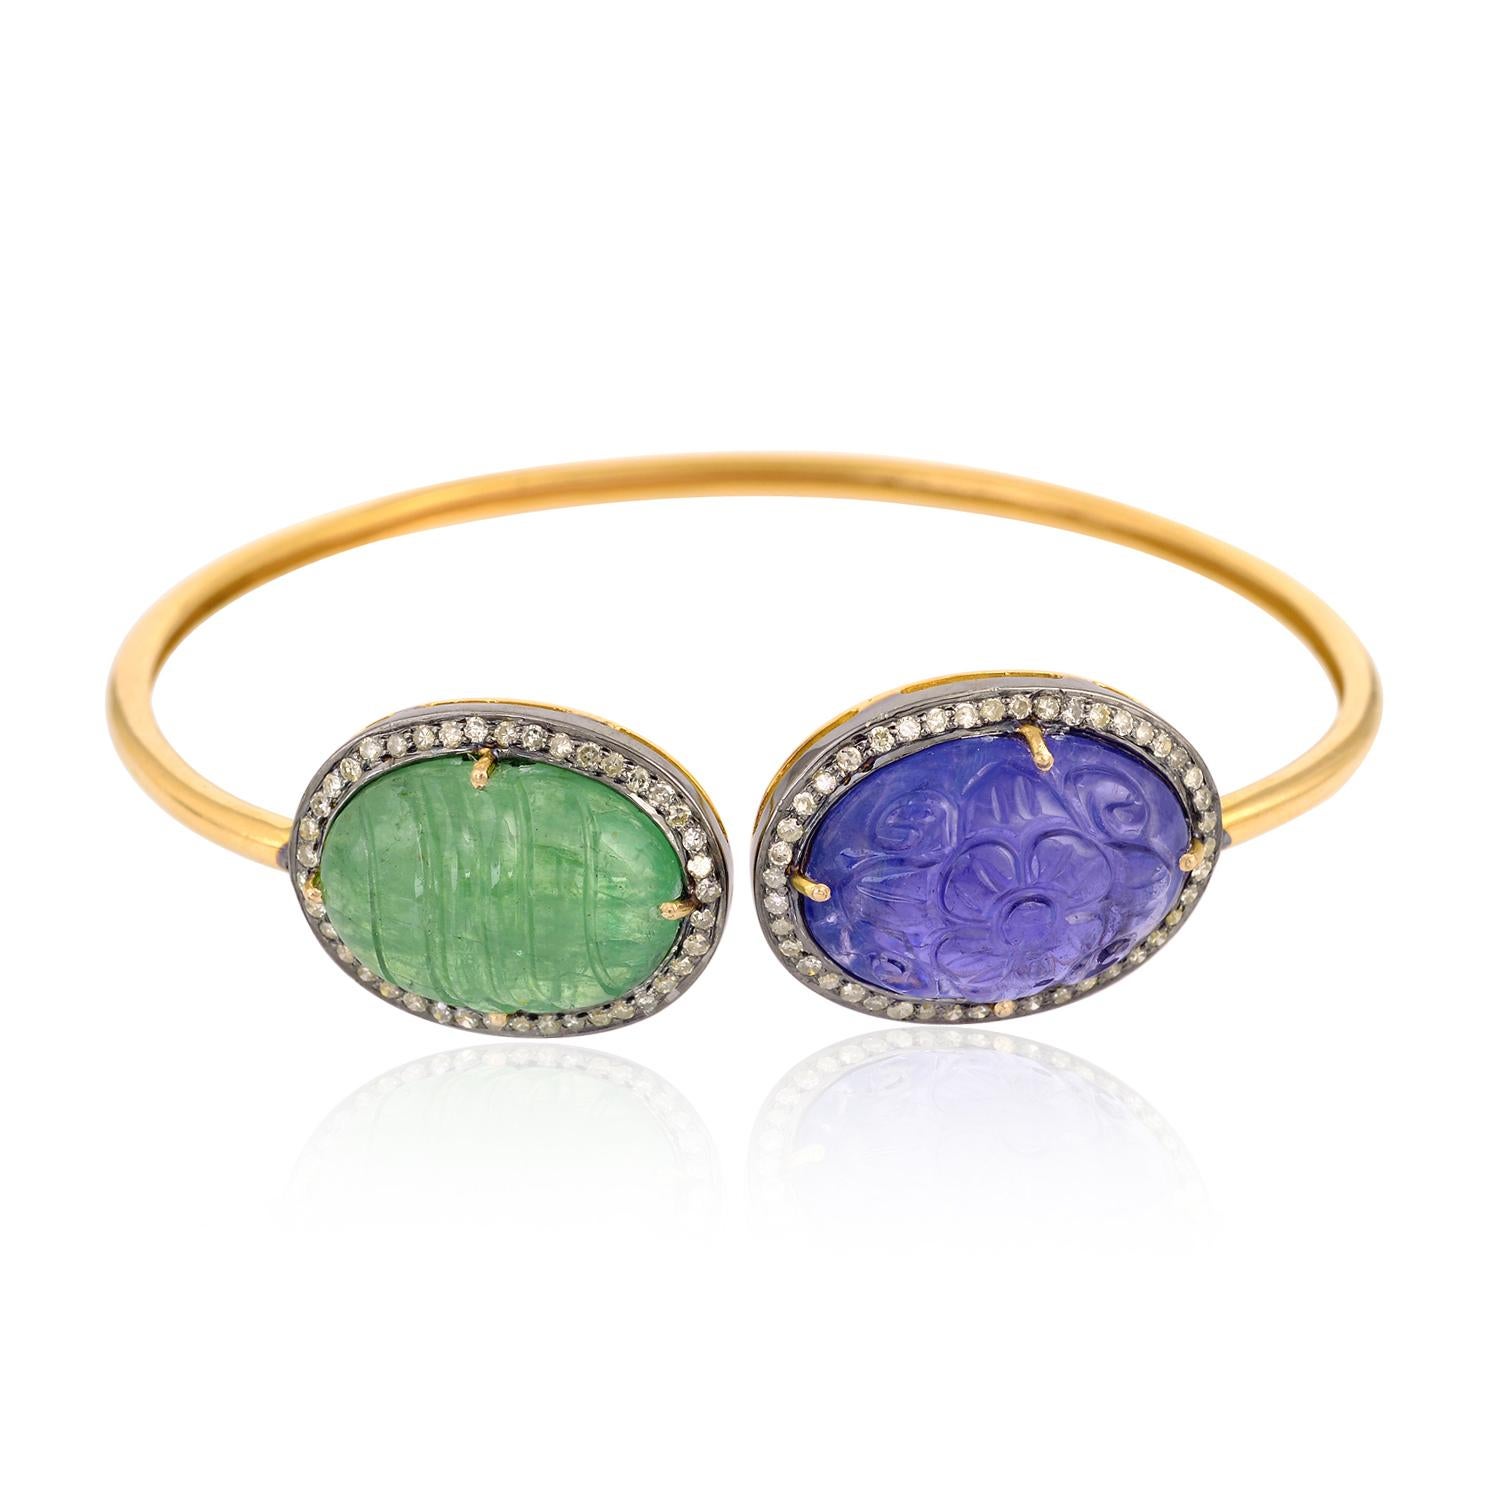 Designer Twistable Carved Tanzanite, Tsavorite and Diamond Bangle in 18k Yellow Gold perfect to have some fun this season under the sun! 

14kt:4.43gms
Diamond:0.61cts
Silver:2.25gms
Tanzanite:13.49cts
Tsavorite:14.10cts
